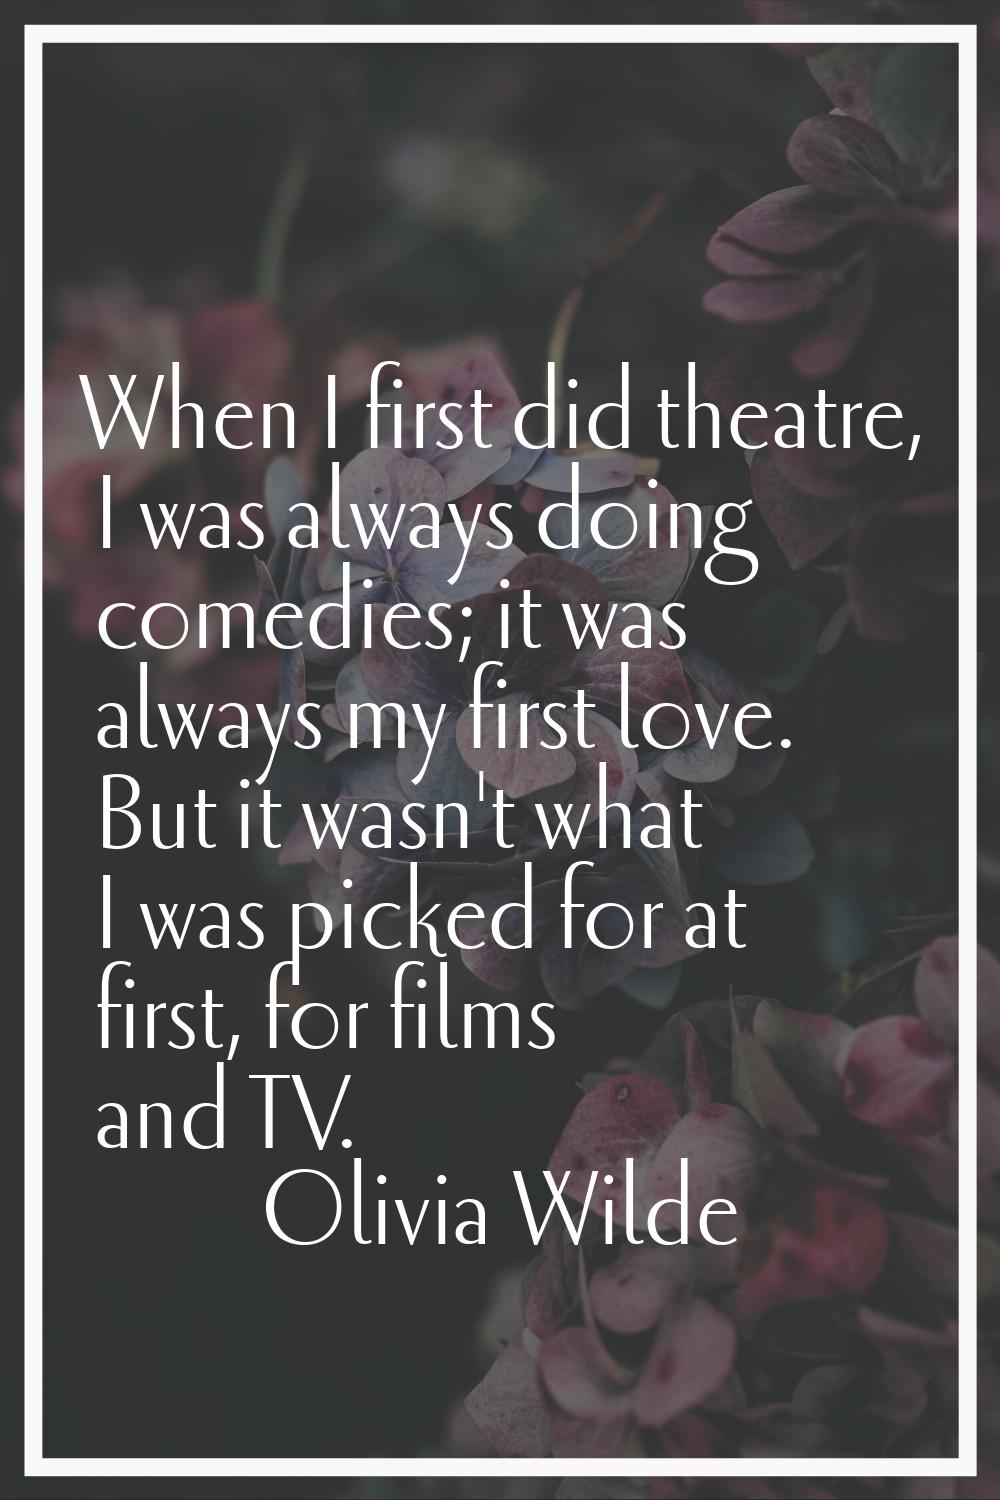 When I first did theatre, I was always doing comedies; it was always my first love. But it wasn't w